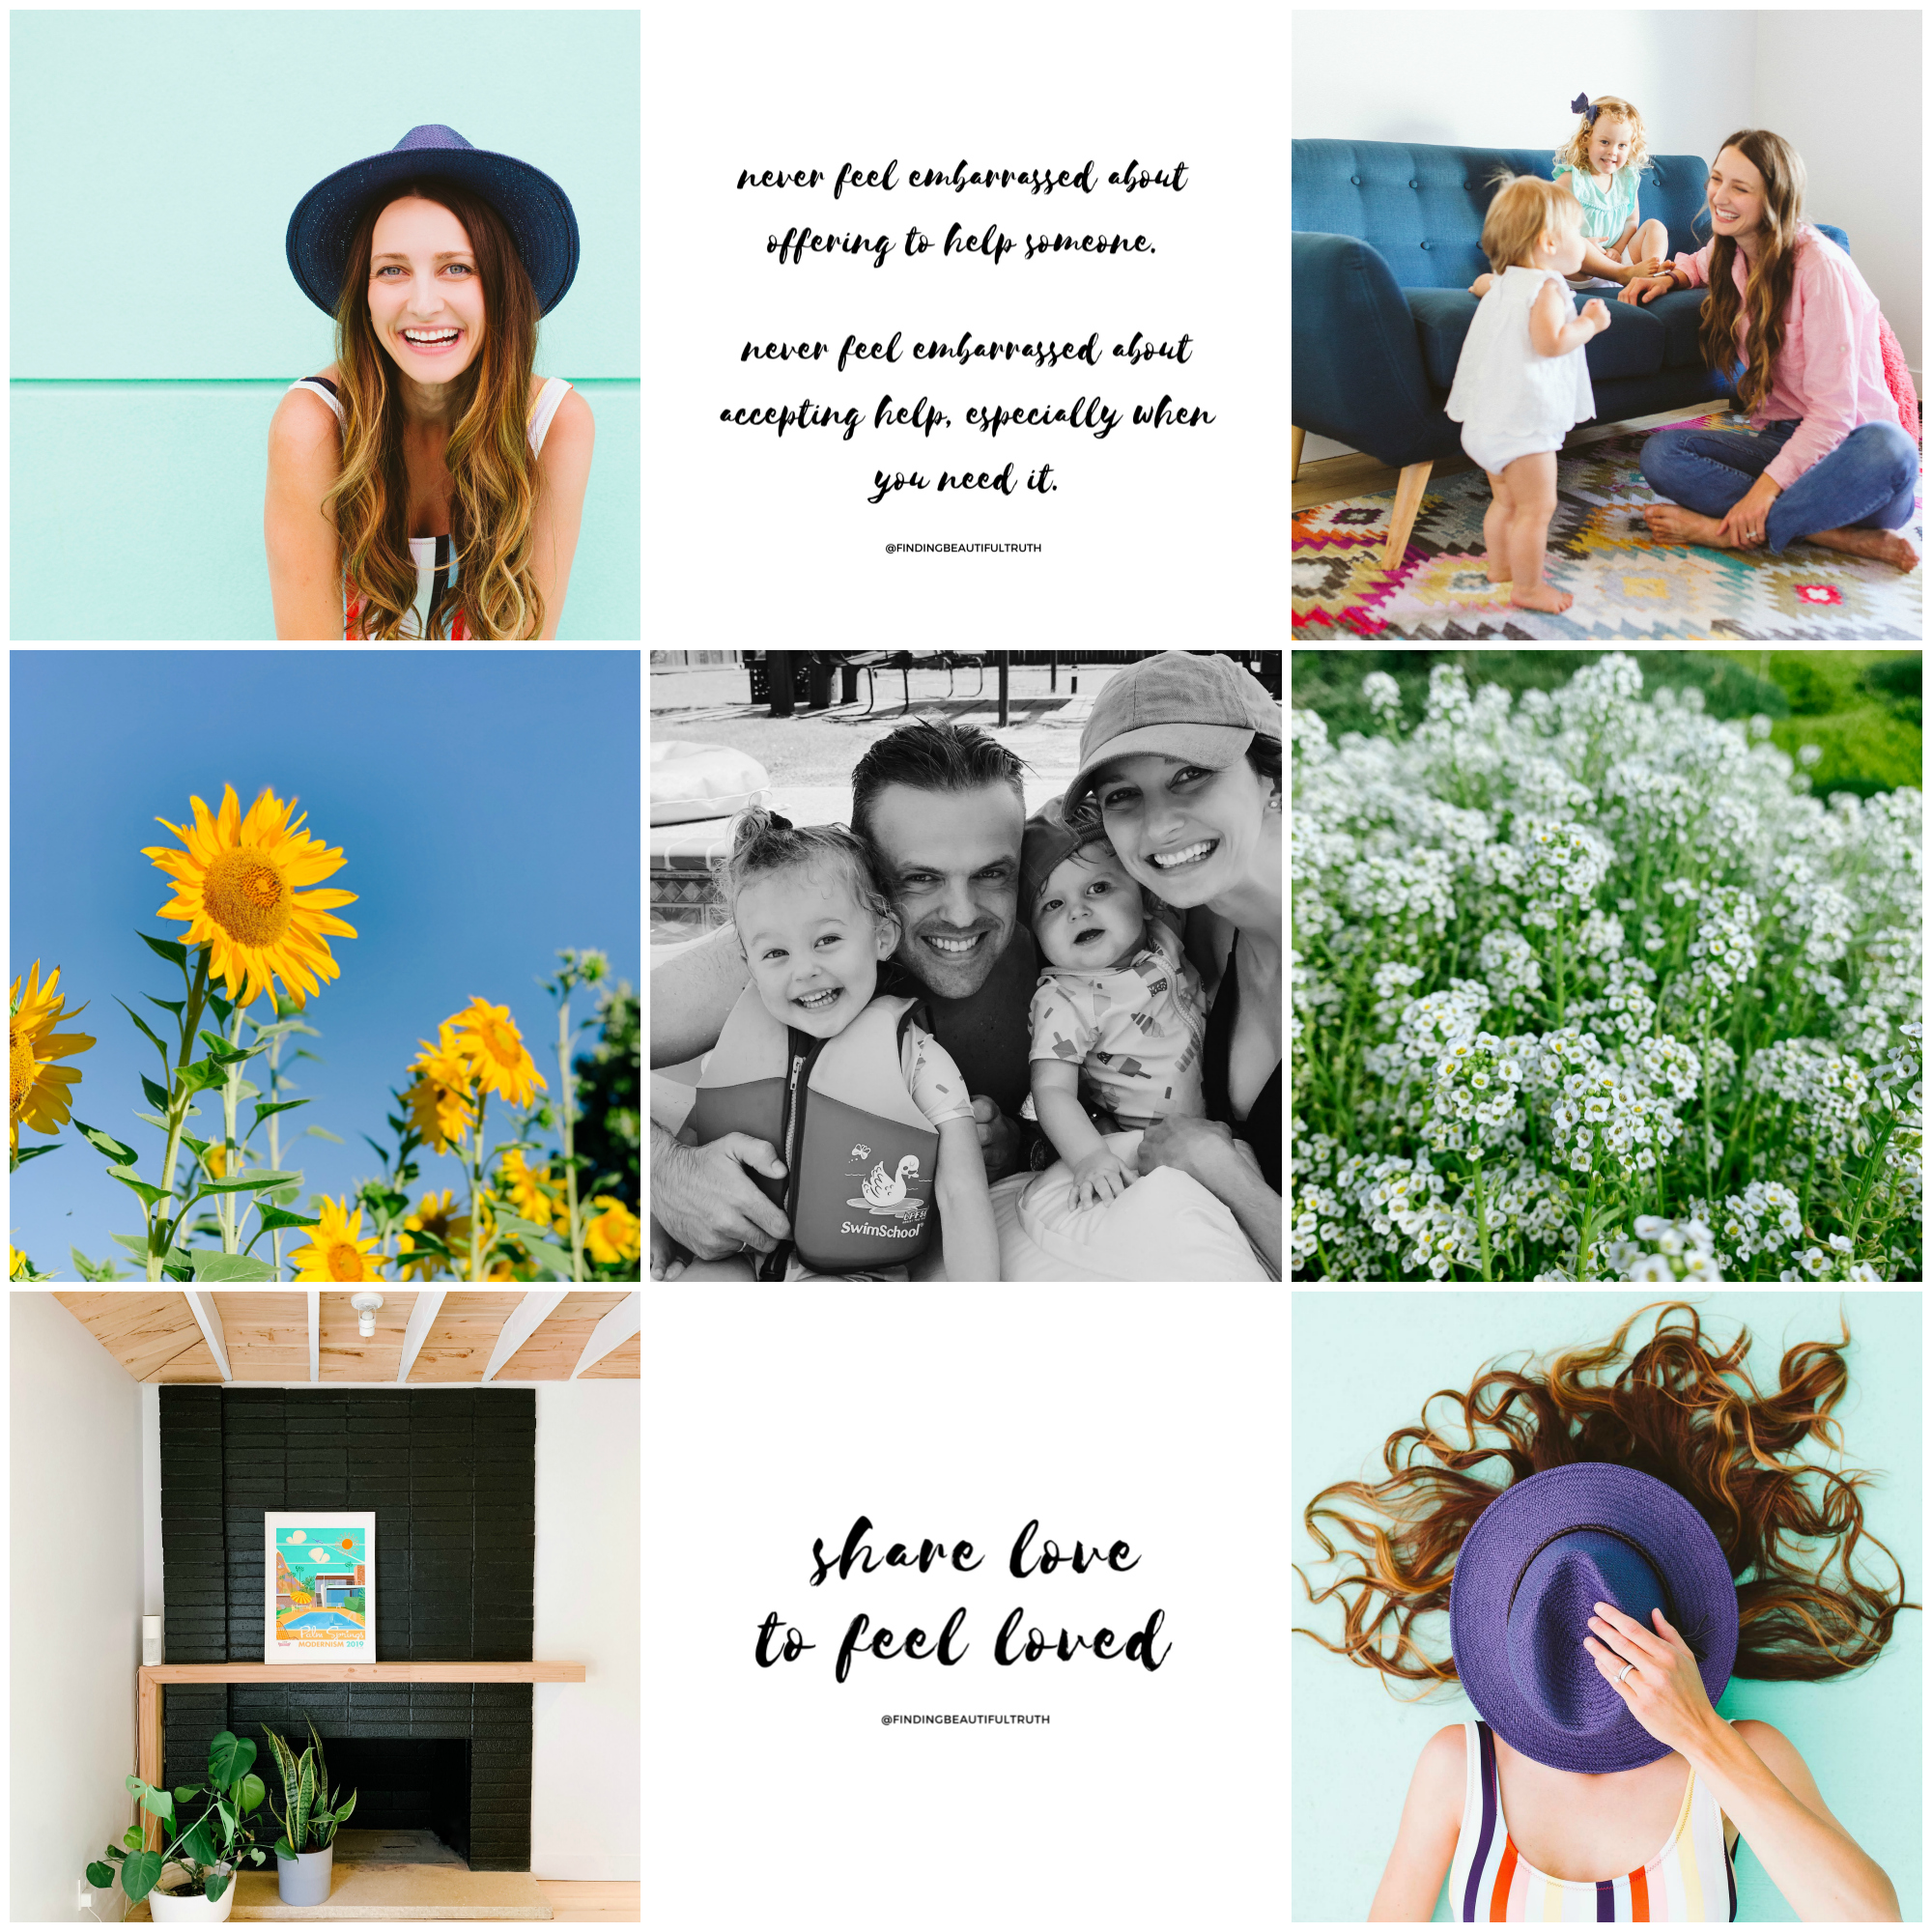 september instagram roundup | life's latest snaps + coordinating links via Finding Beautiful Truth